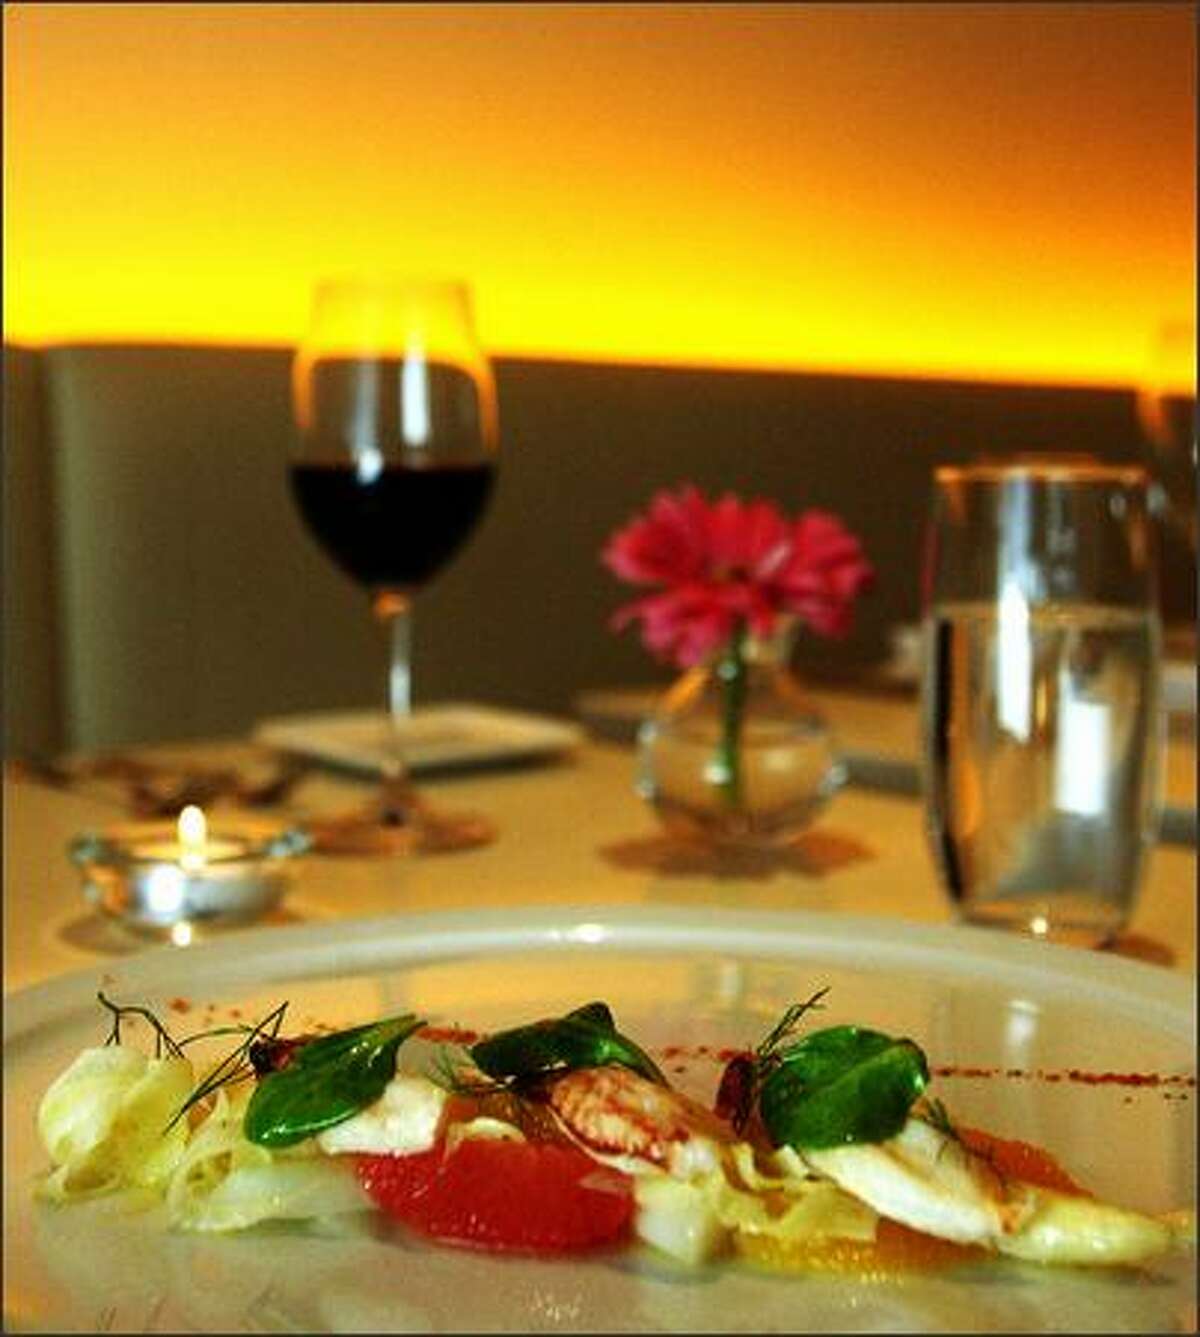 A white asparagus salad neatly arranges the vegetables with finger lengths of Dungeness crabmeat and perfectly peeled citrus segments.